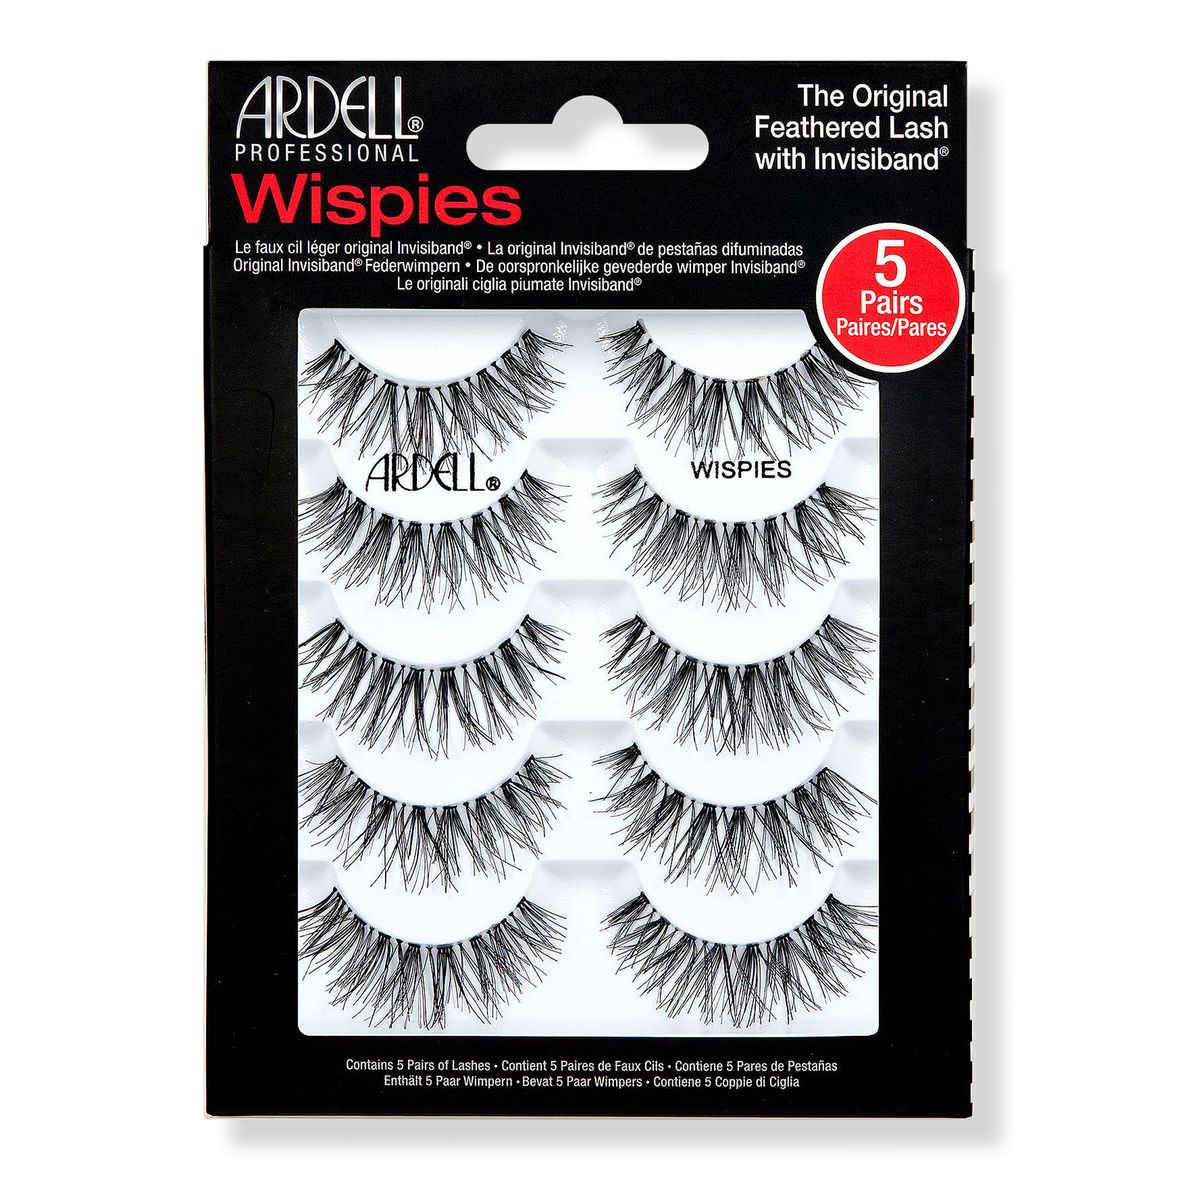 ArdellLash Wispies MultipackItem 25257254.64.6 out of 5 stars. 140 reviews140 Reviews | Ulta